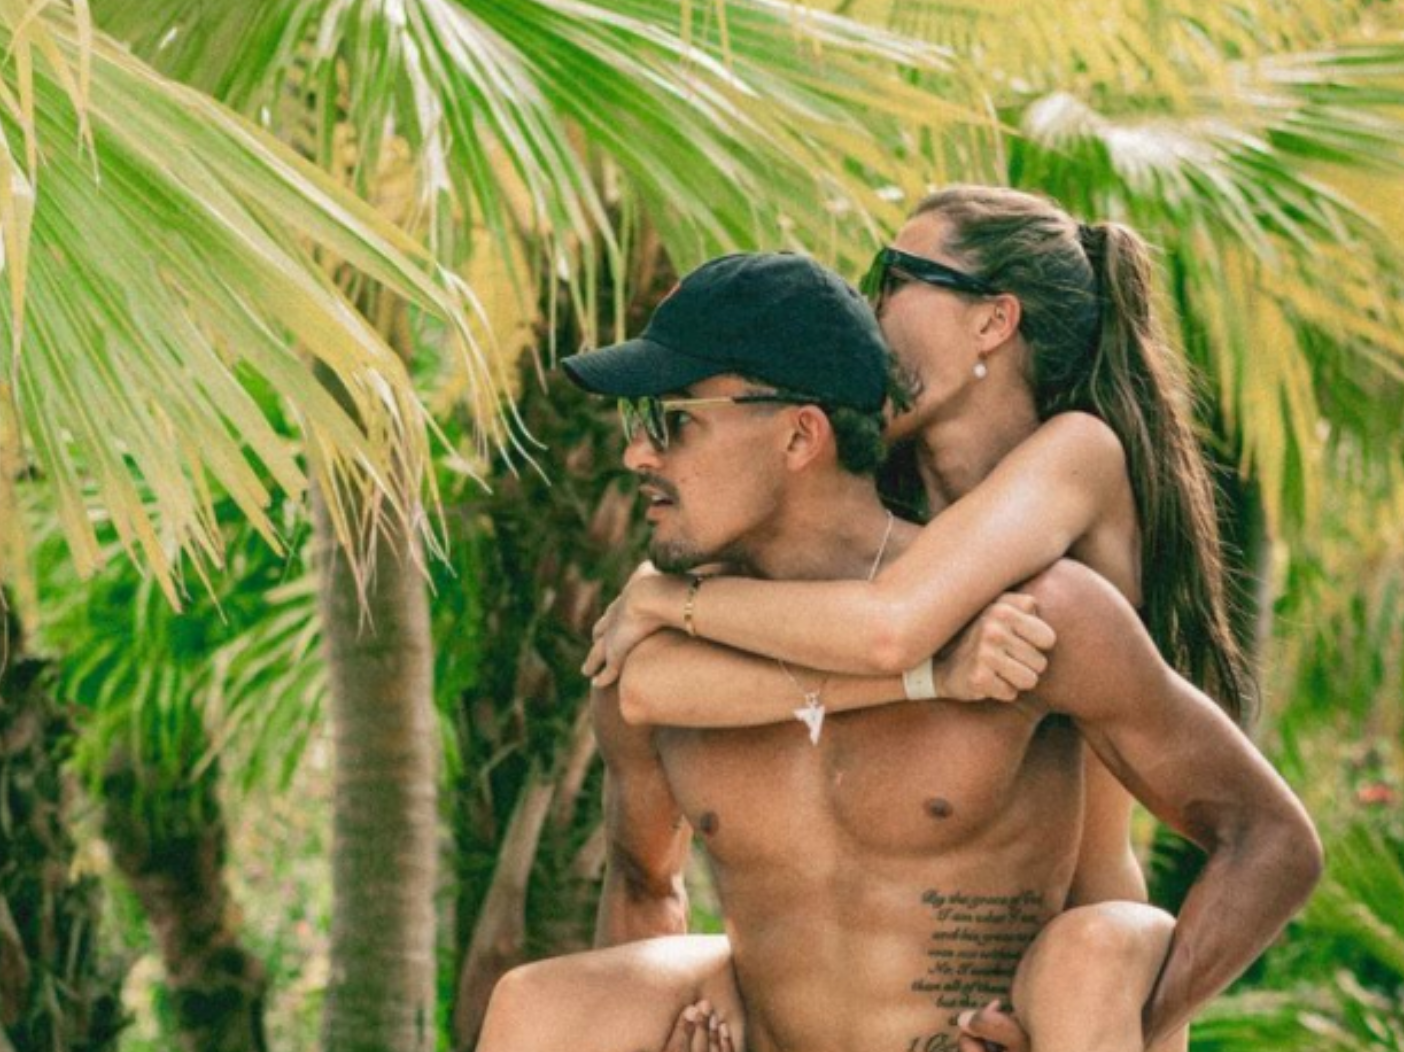 Trae Young and Shelby Miller are piggybacking in a tropical location